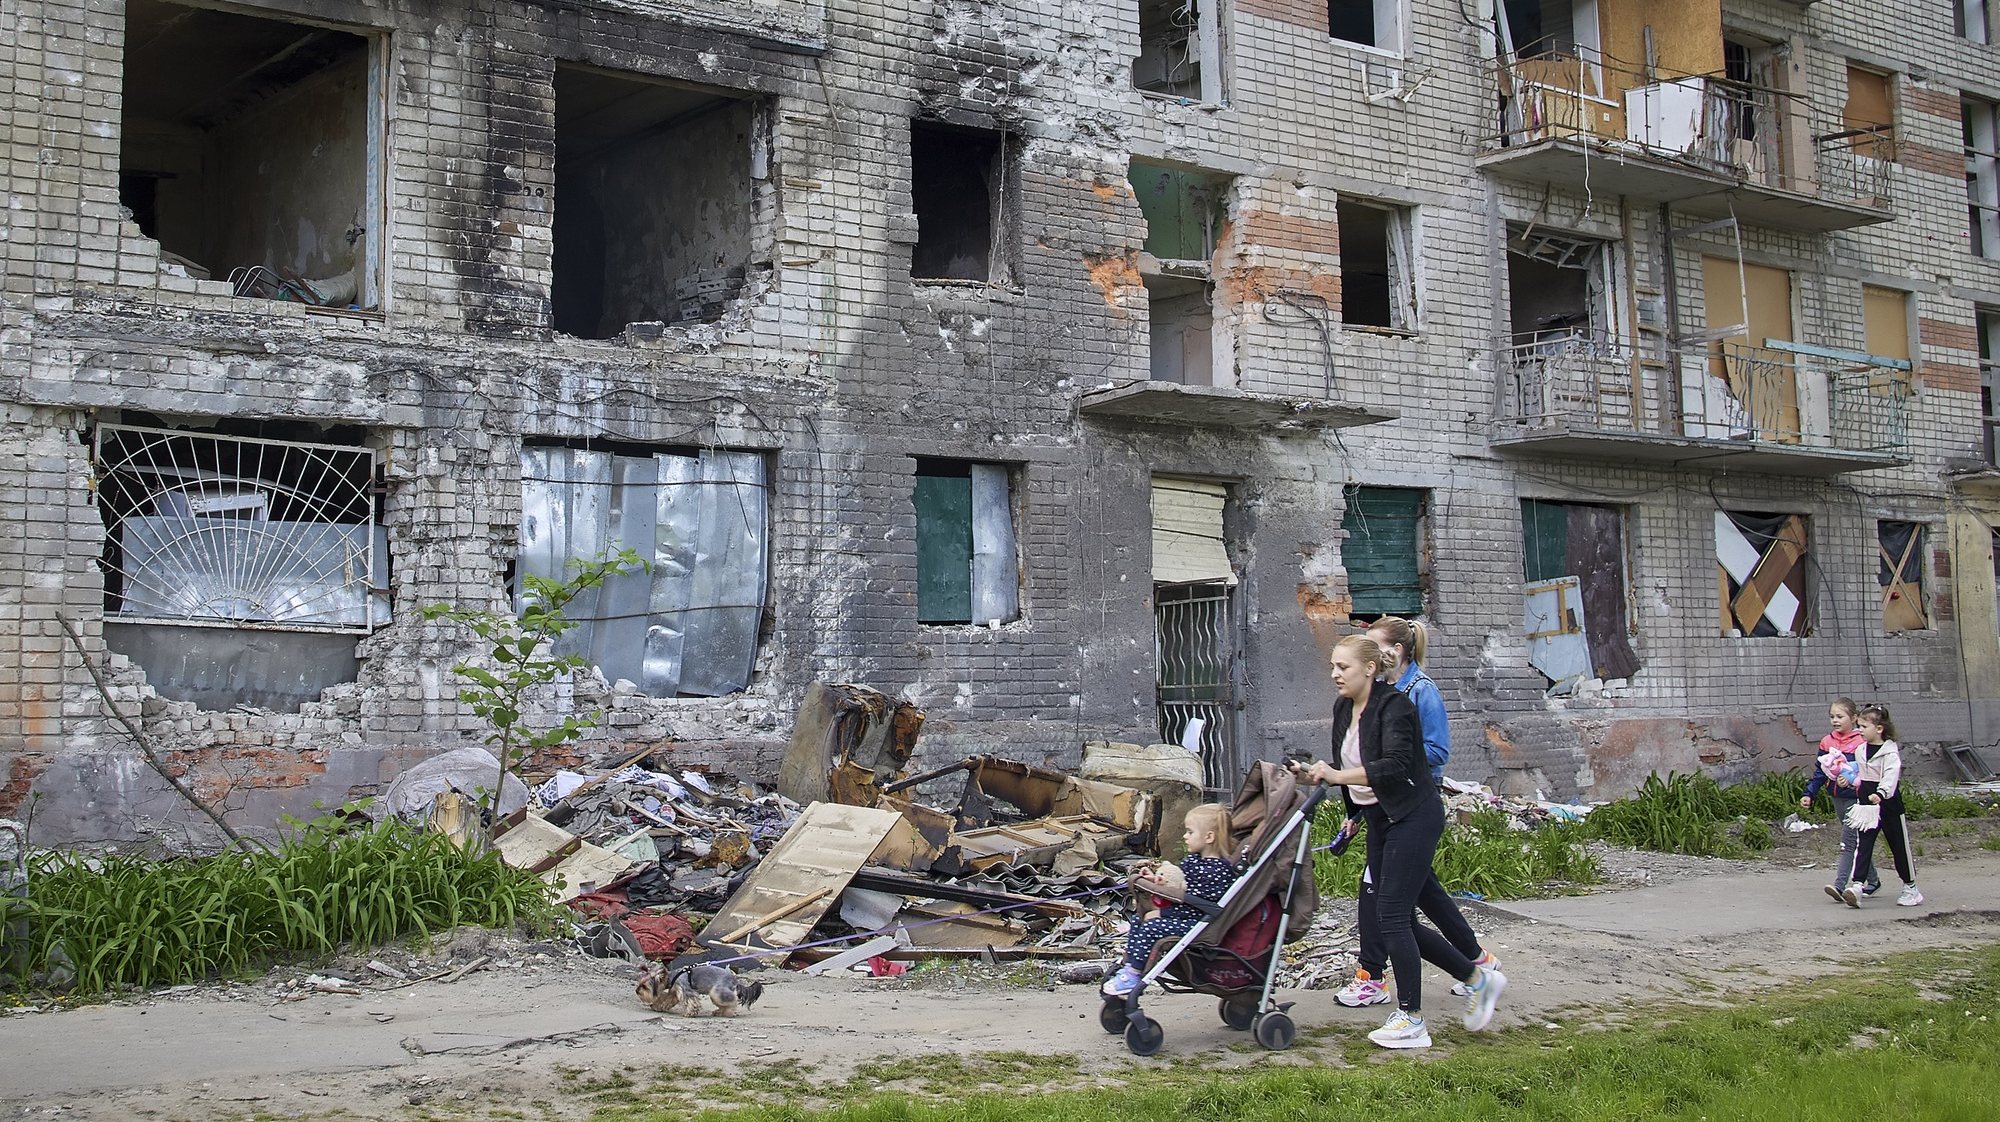 epa09974740 Locals walk past a building that was damaged during shelling in the outskirts of Kharkiv, Ukraine, 25 May 2022. Ukraine&#039;s second-largest city Kharkiv and its surroundings witnessed repeated airstrikes from Russian forces. On 24 February, Russian troops invaded Ukrainian territory starting a conflict that has provoked destruction and a humanitarian crisis. According to the UNHCR, more than 6.5 million refugees have fled Ukraine, and a further 7.7 million people have been displaced internally within Ukraine since.  EPA/SERGEY KOZLOV